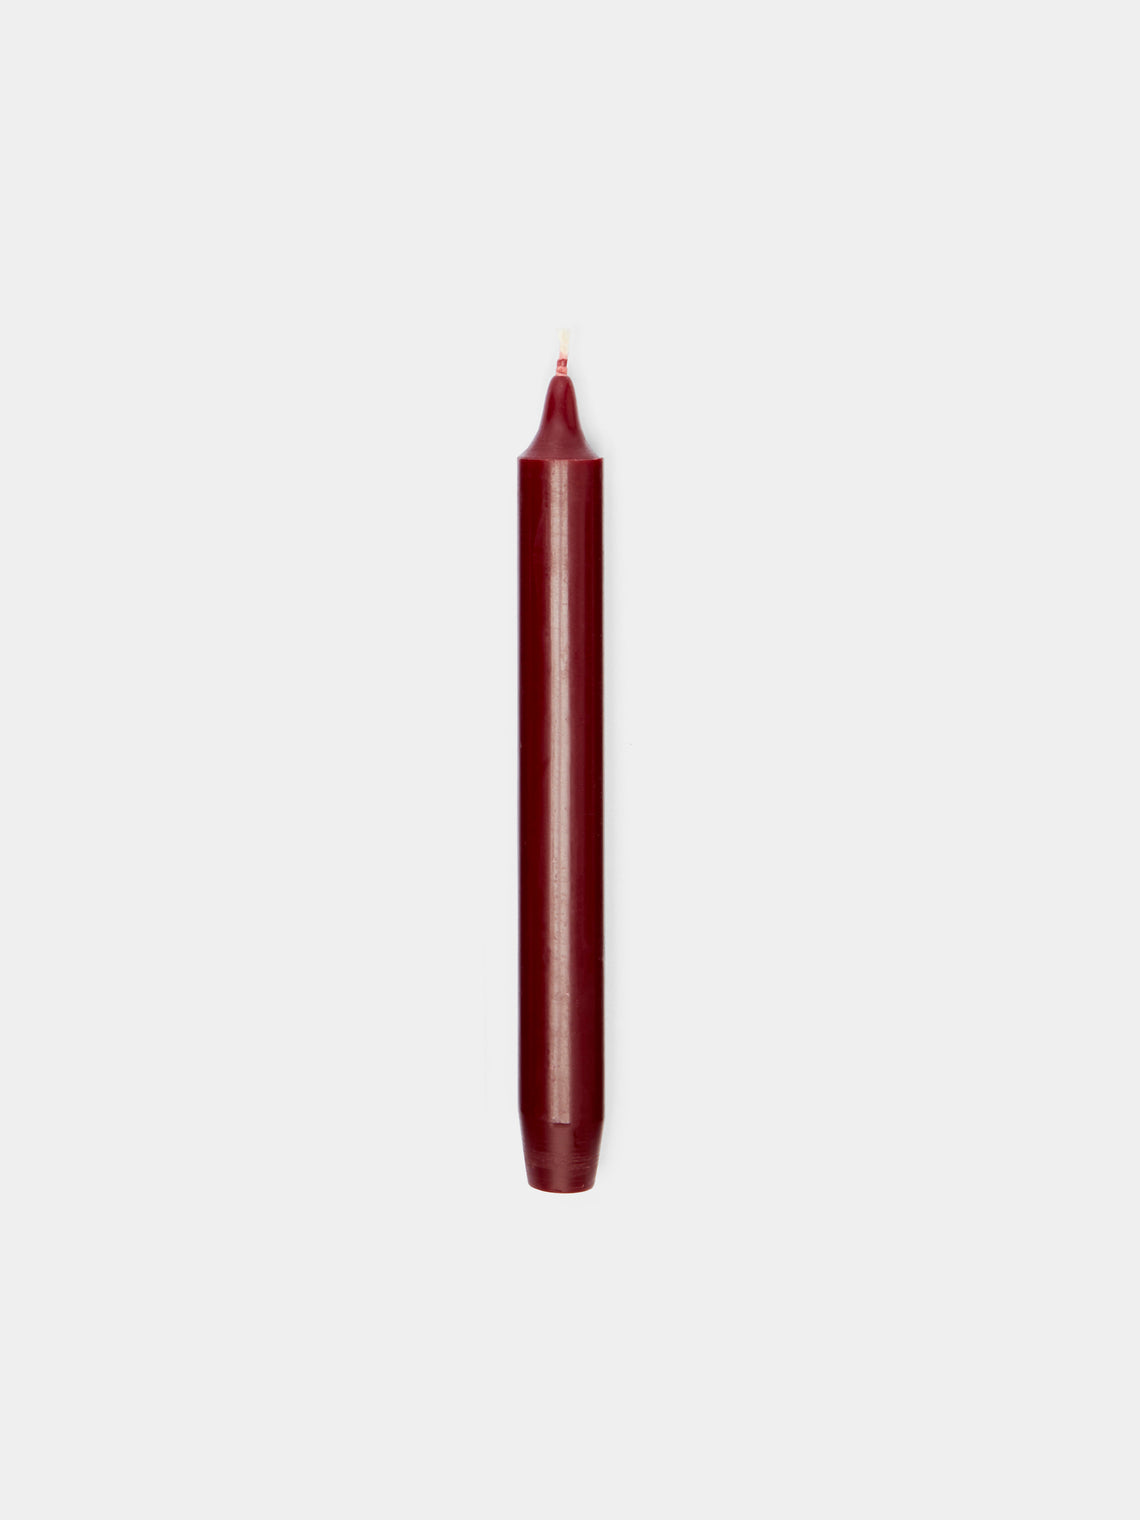 Trudon - Tapered Candles (Set of 6) - Burgundy - ABASK